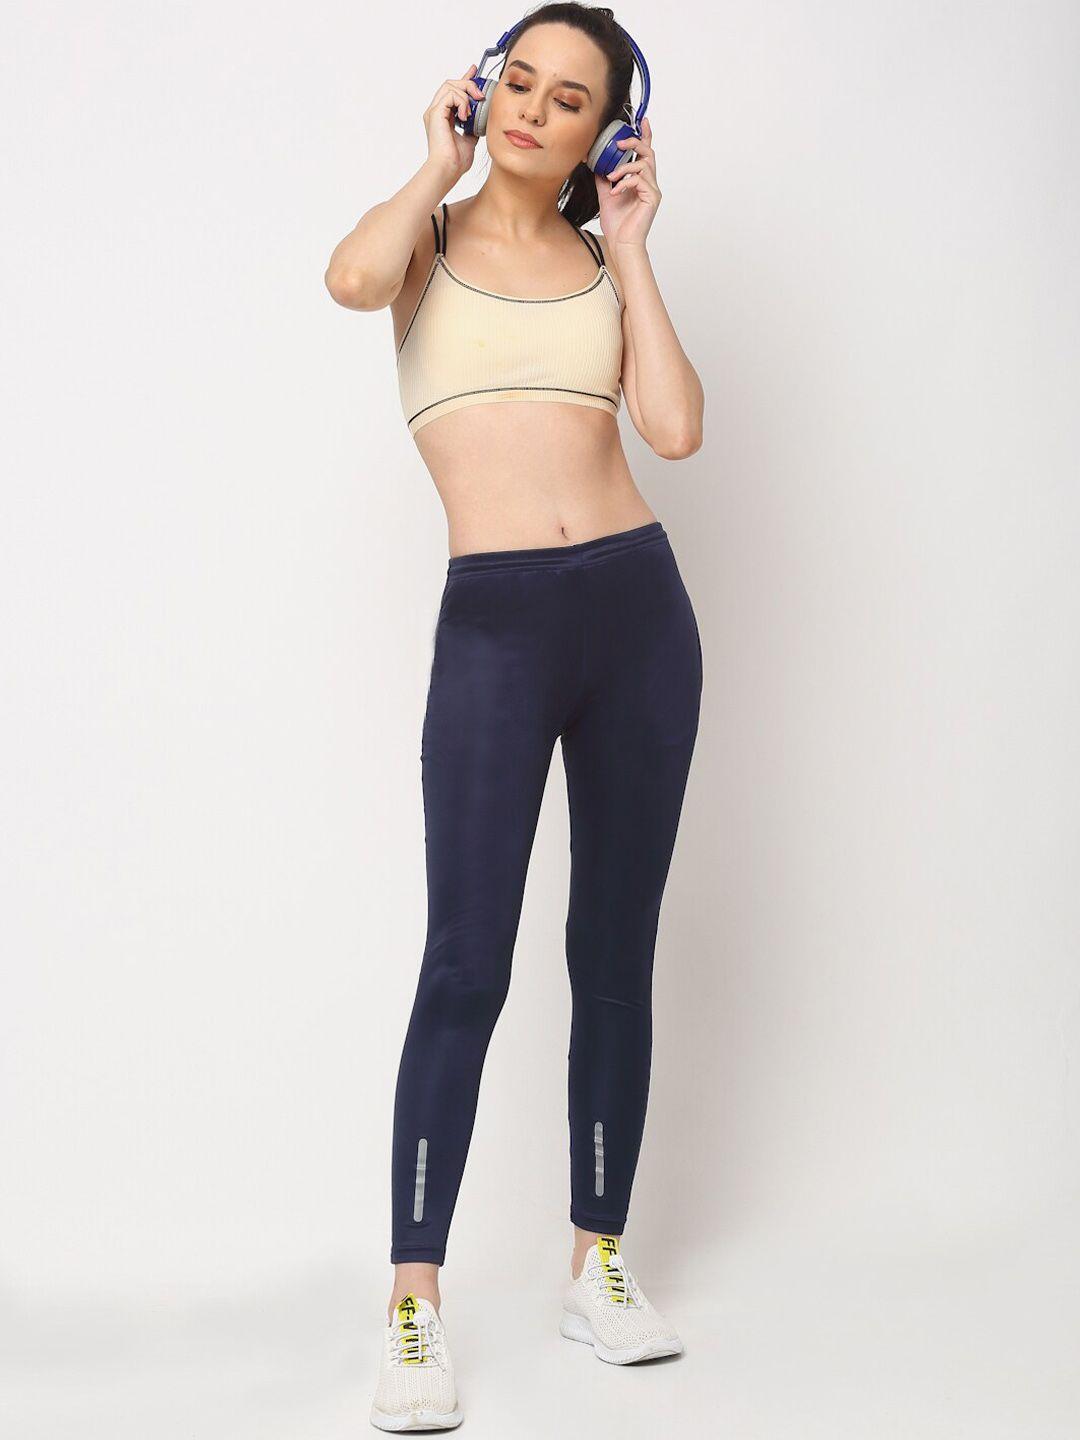 dressberry women navy blue slim-fit ankle-length sports tights